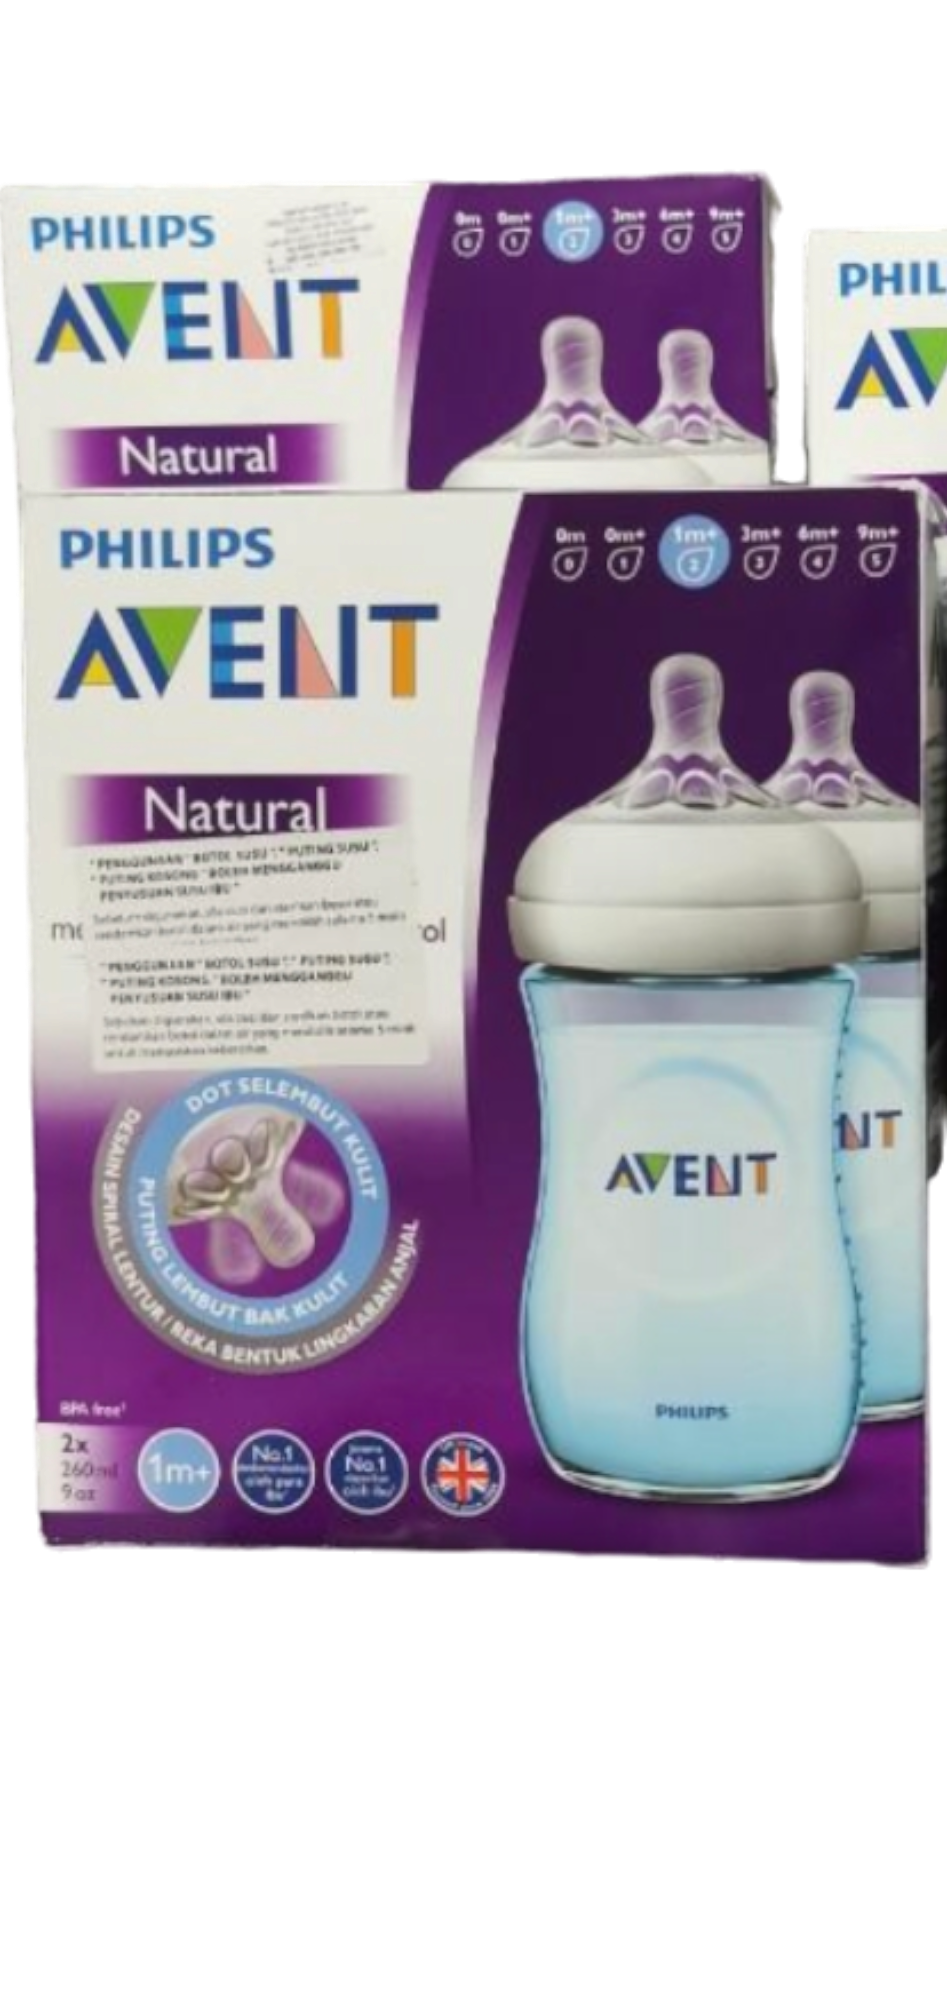 AVENT NATURAL 260ML BLUE BOTTLES (TWIN PACK)